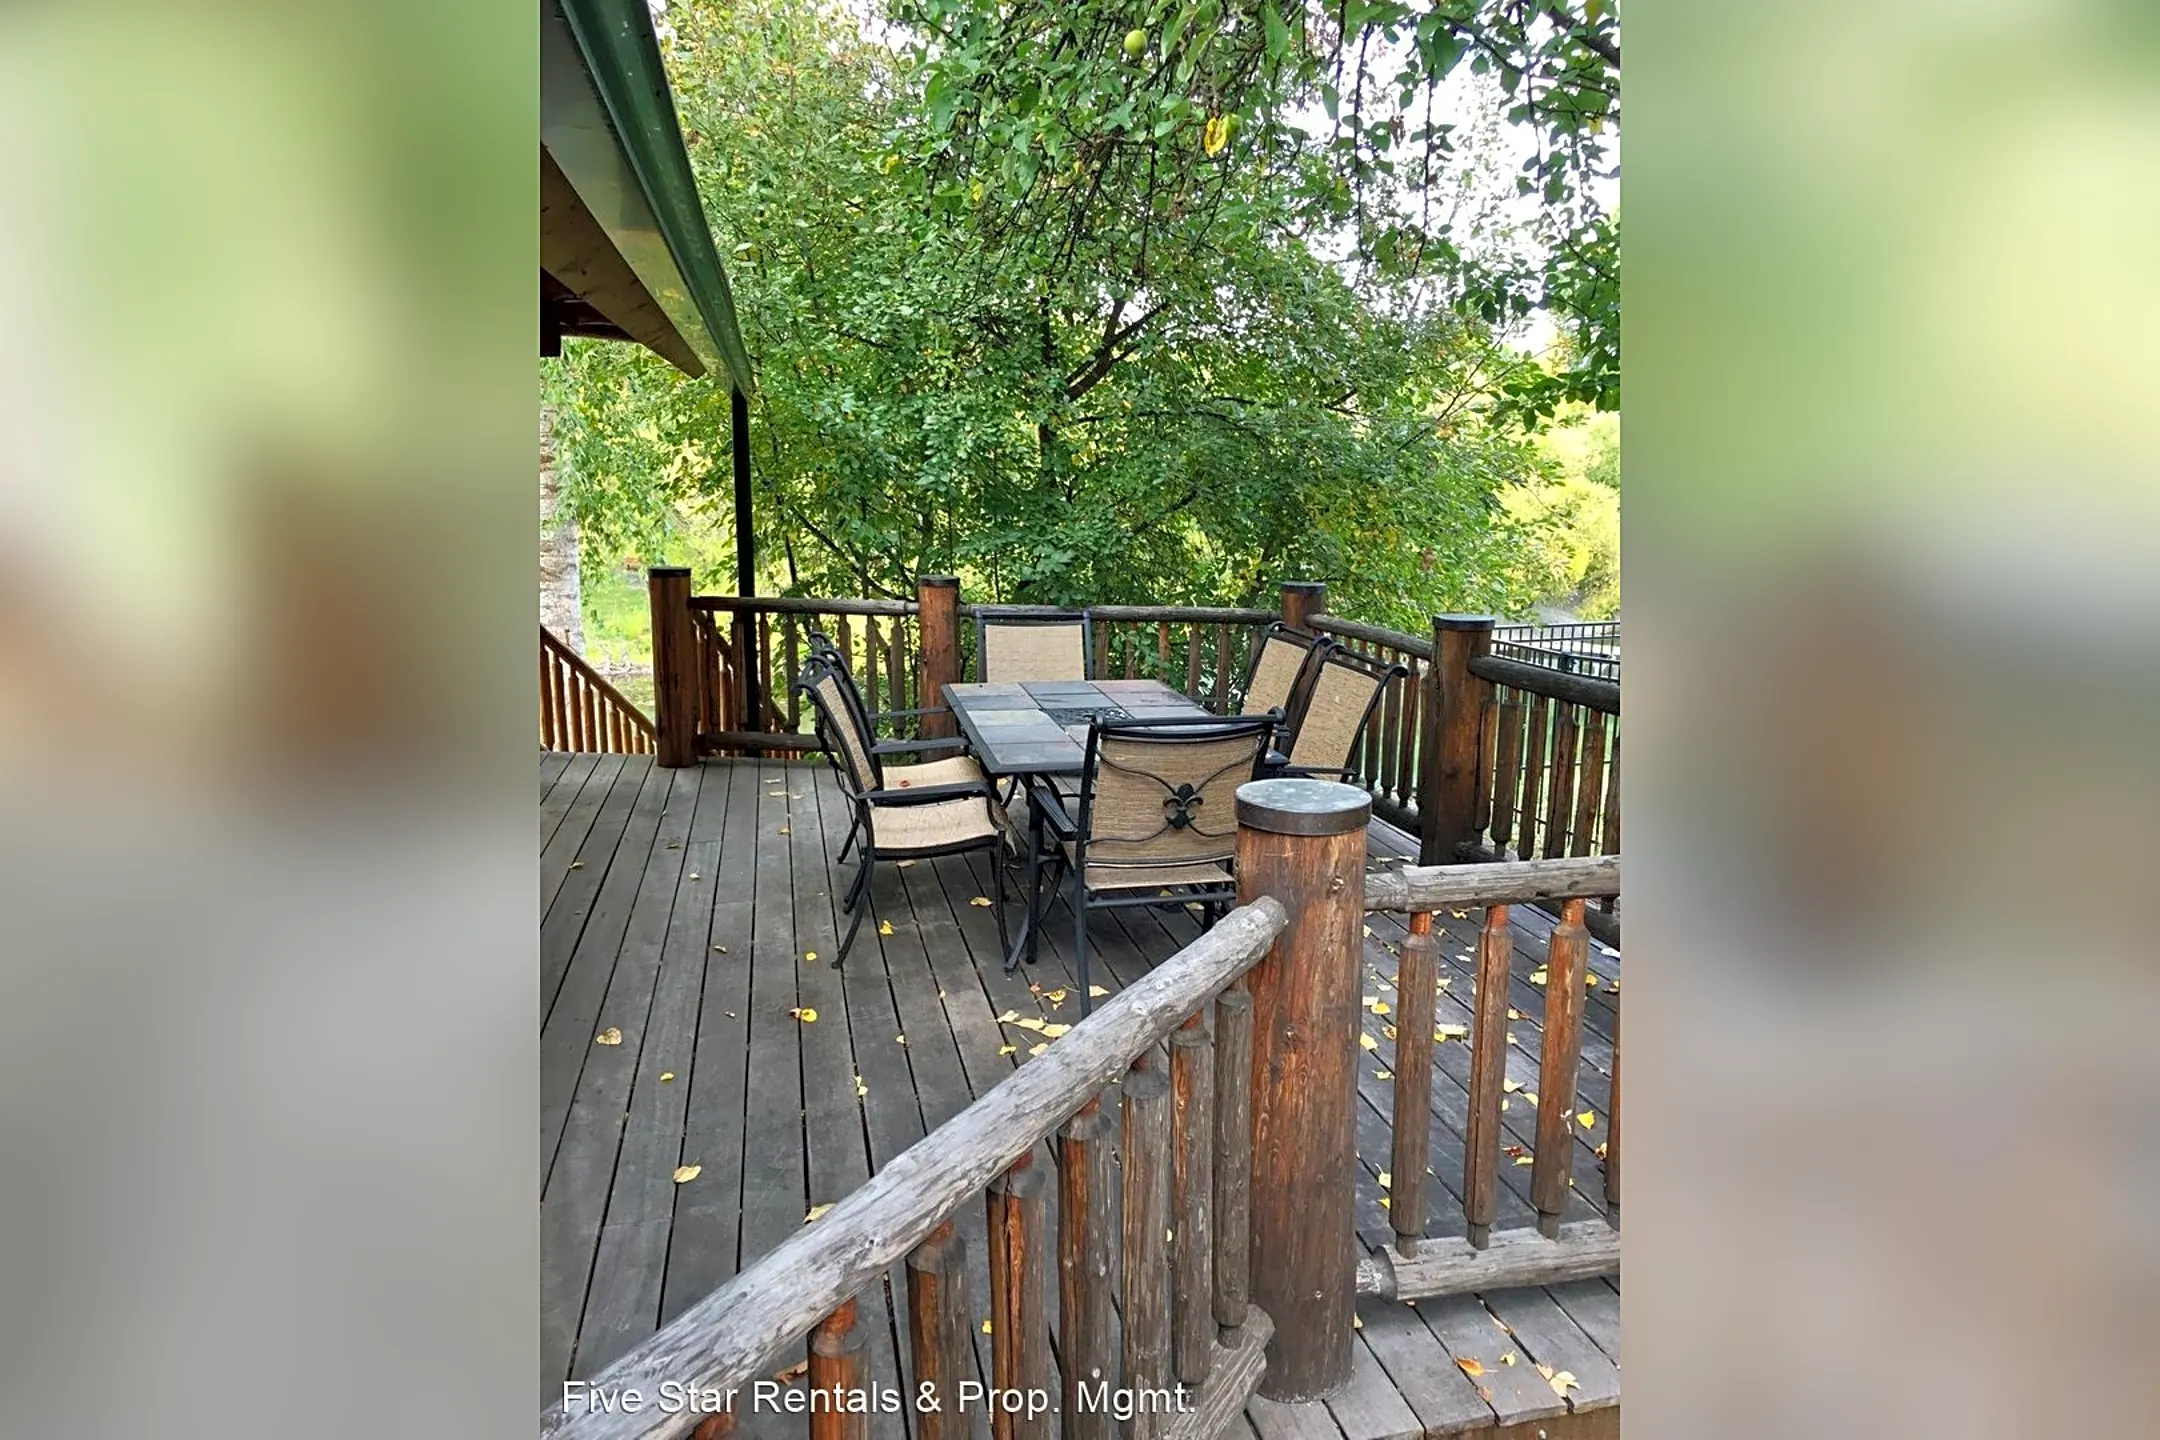 Patio / Deck - 214 W 6th St - Whitefish, MT